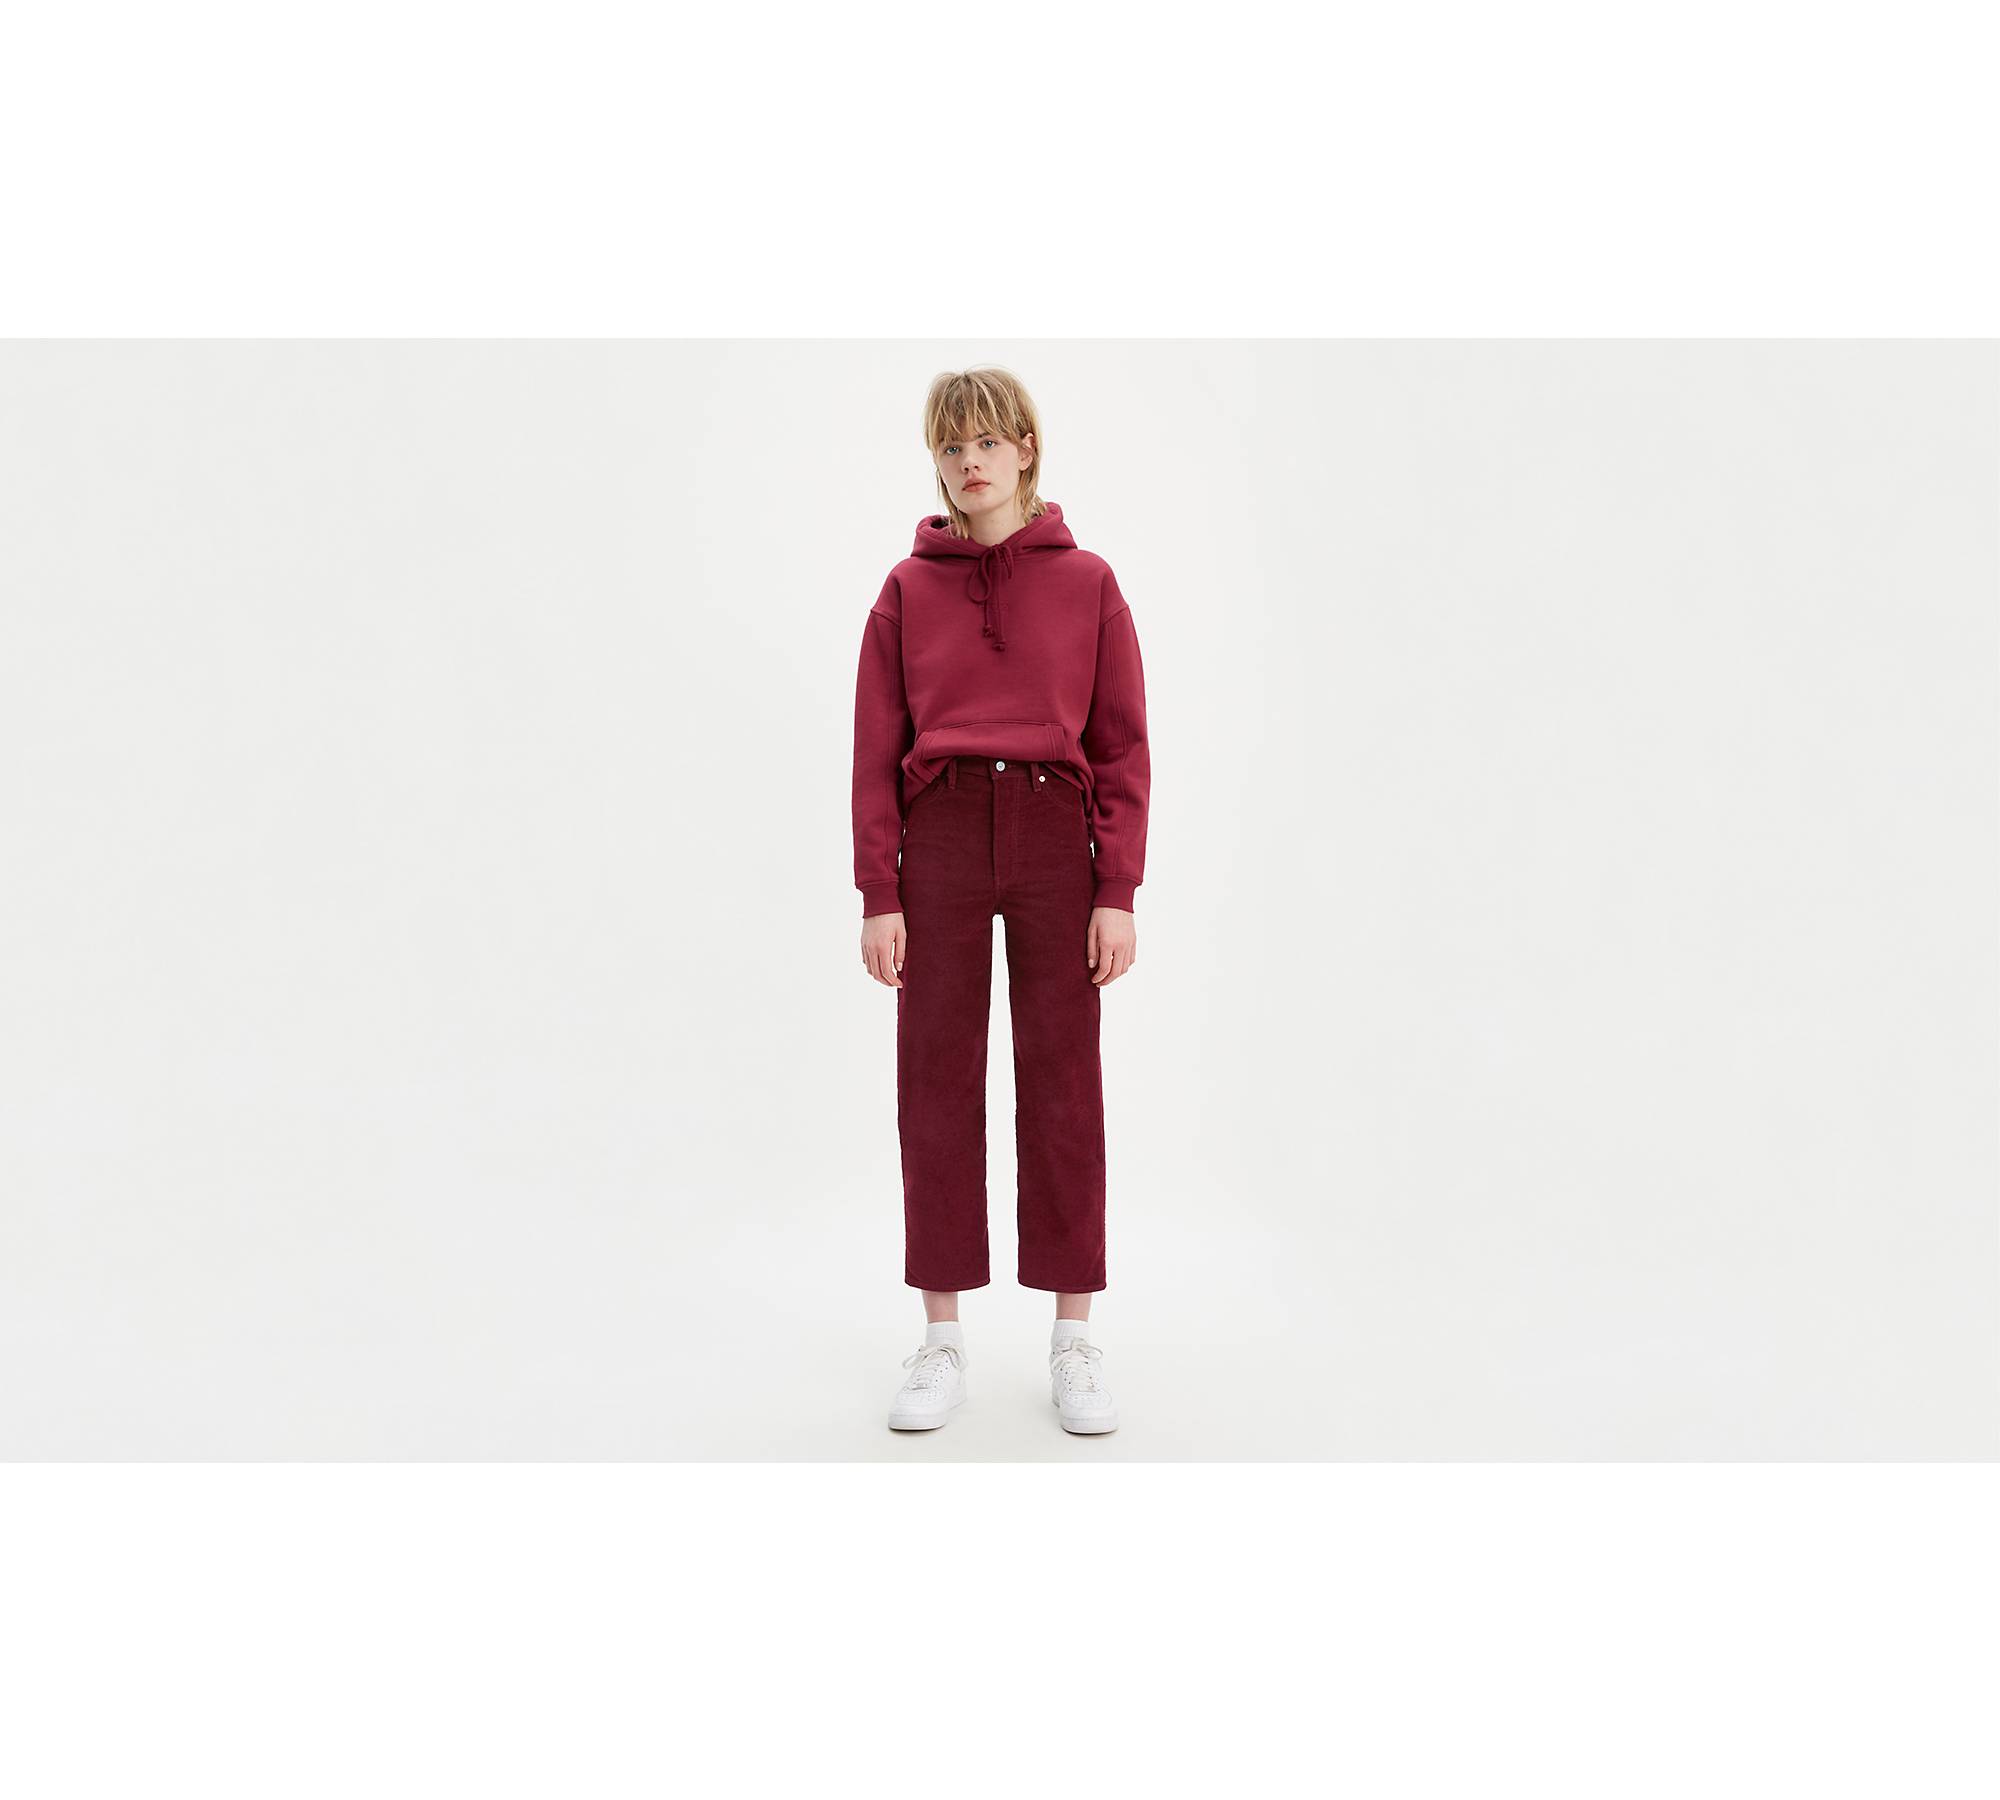 RED CORDUROY TROUSERS